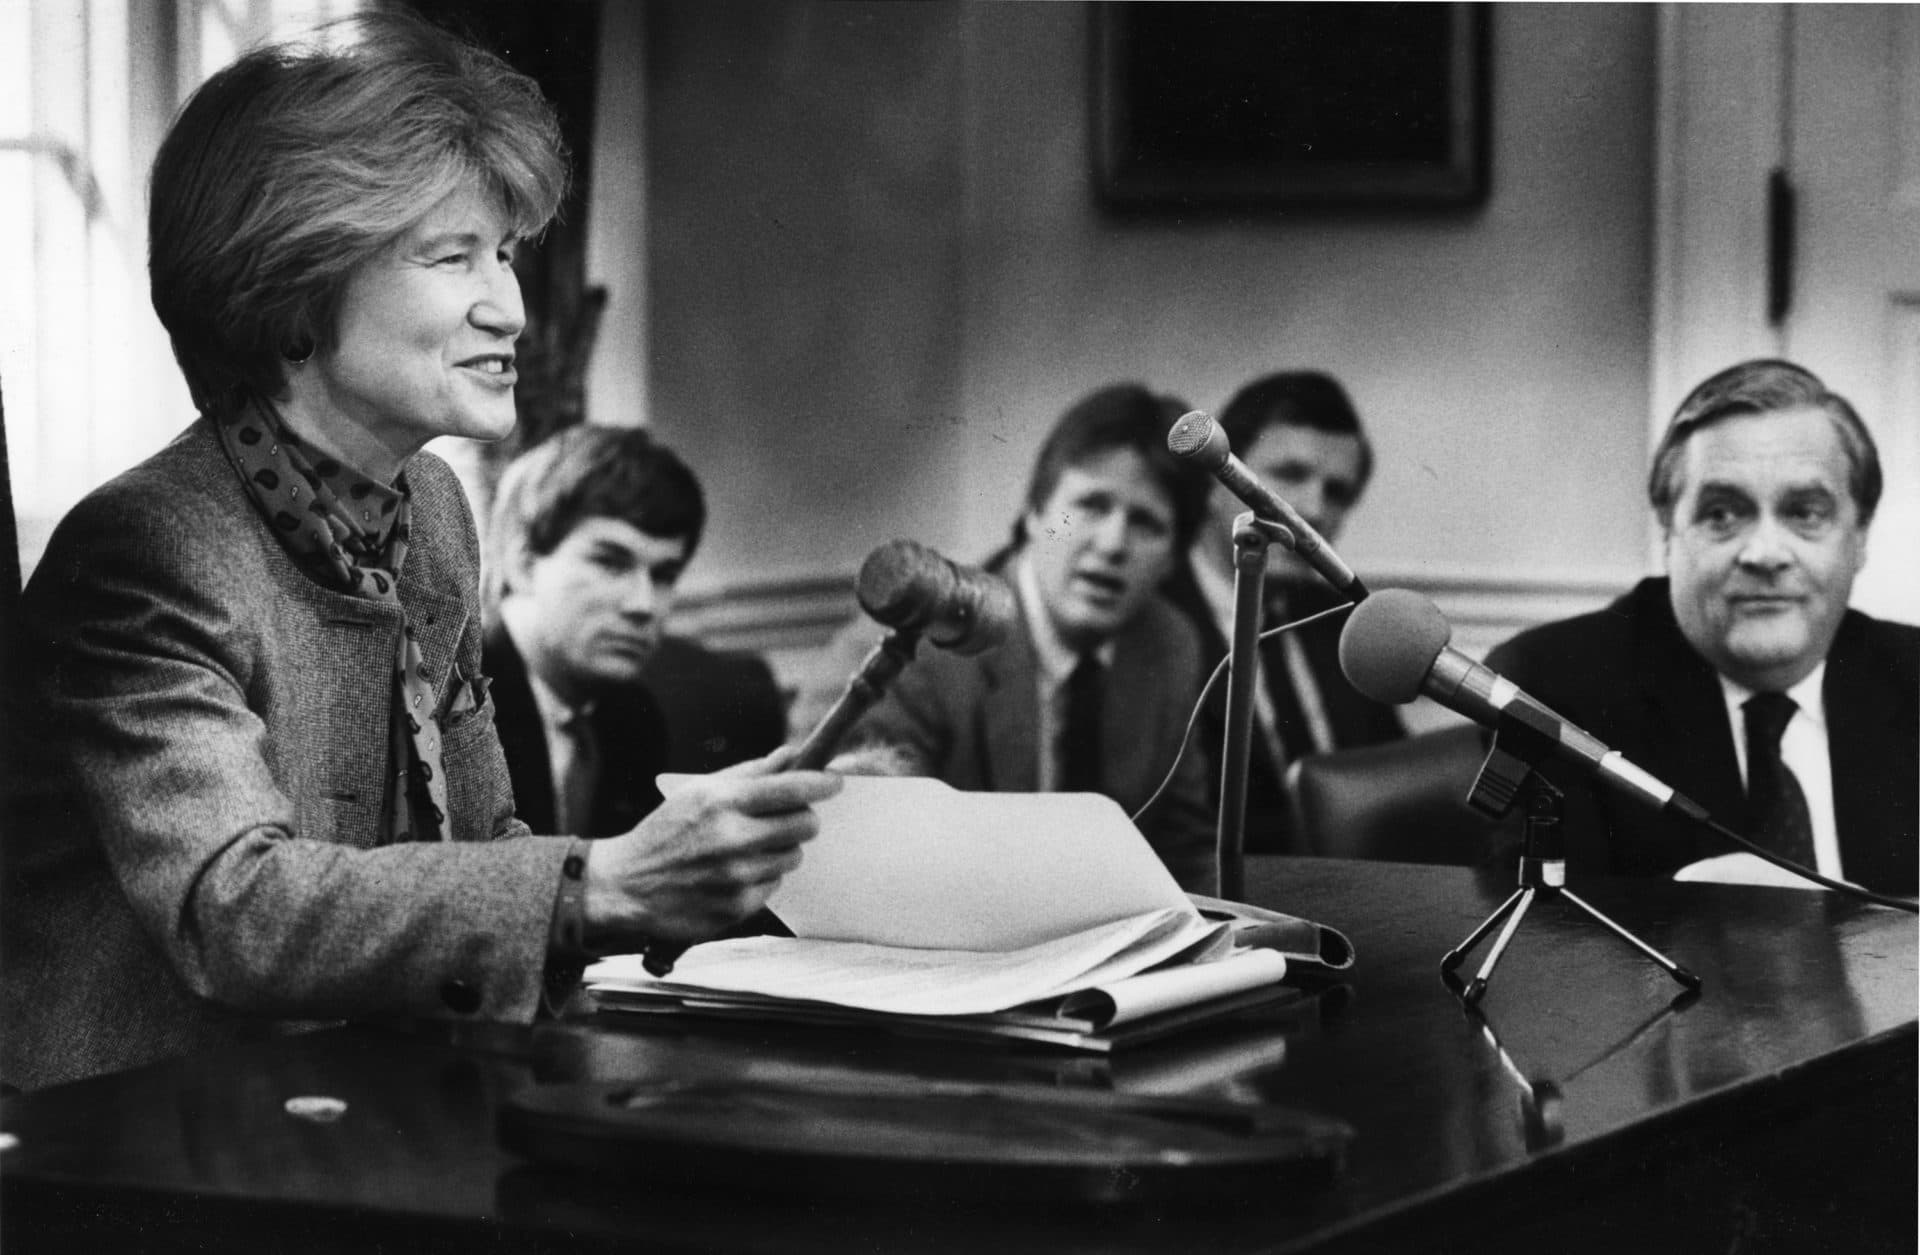 Former Lt. Gov Evelyn Murphy presides over a meeting of the Governor's Council in 1987. (Wendy Maeda/The Boston Globe via Getty Images)